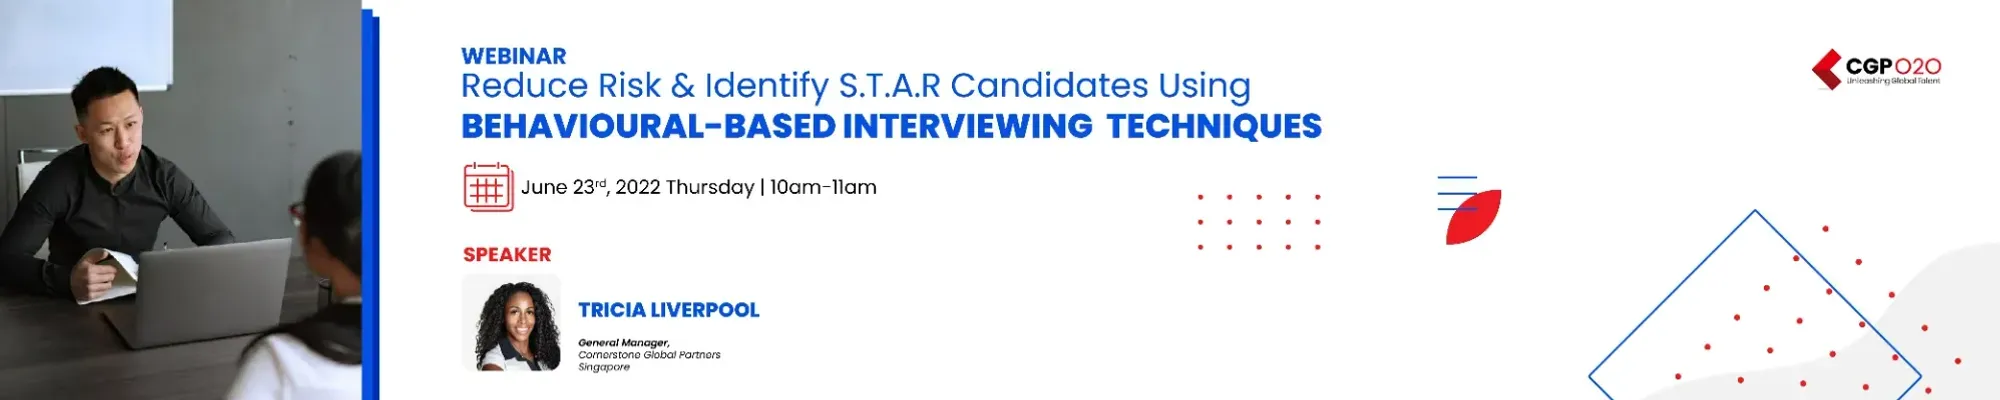 Reduce Risk & Identify S.T.A.R Candidates Using Behavioural Based Interview (BBI) Techniques - CGP Singapore